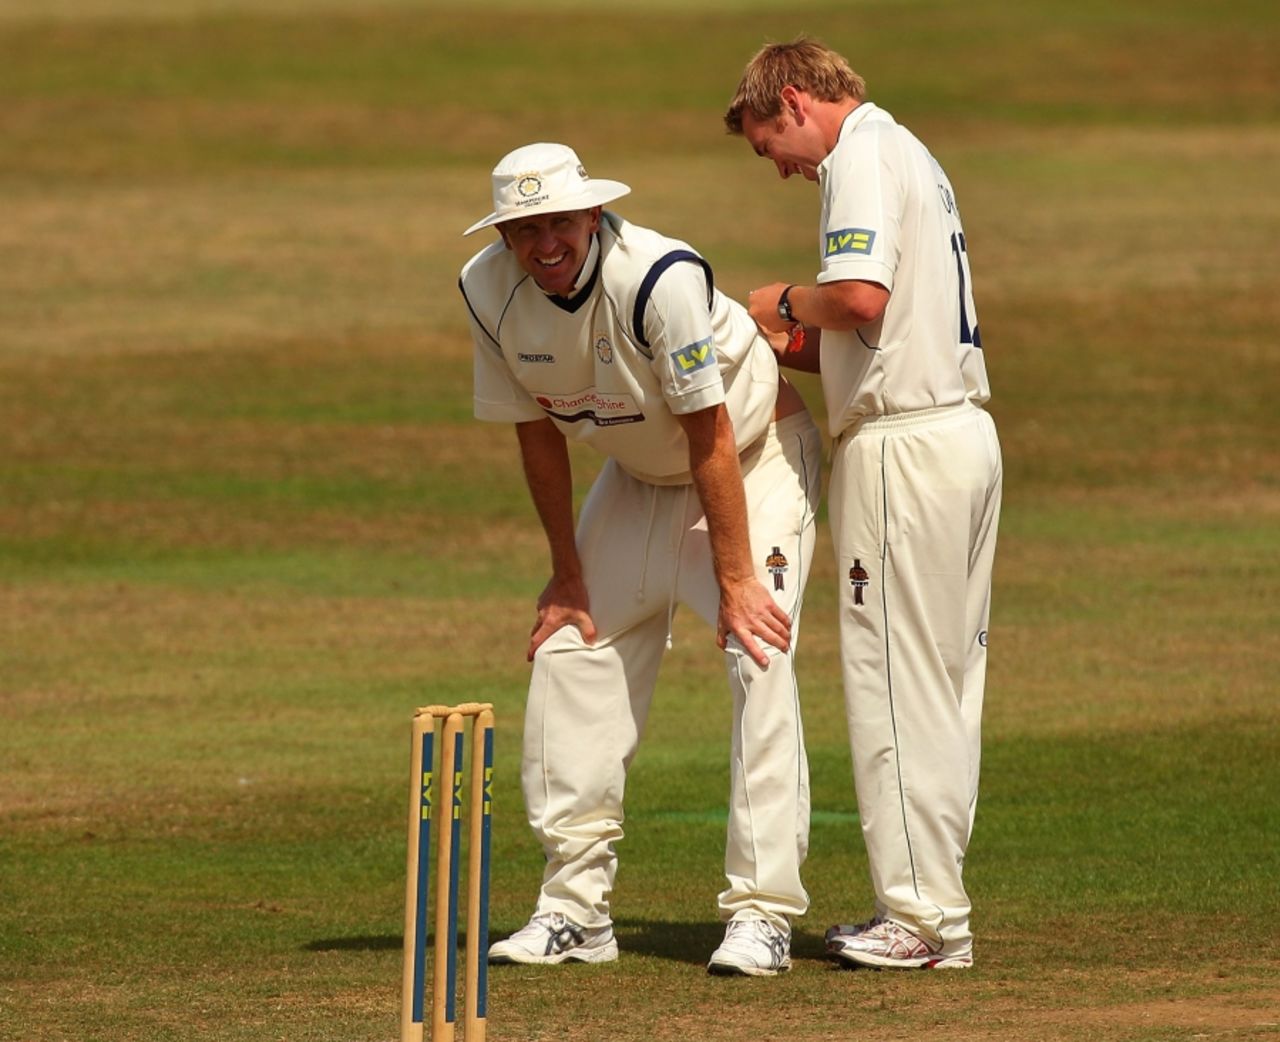 Dominic Cork struggled with a back injury and eventually had to leave the field, Somerset v Hampshire, County Championship Division One, Taunton, August 11 2010